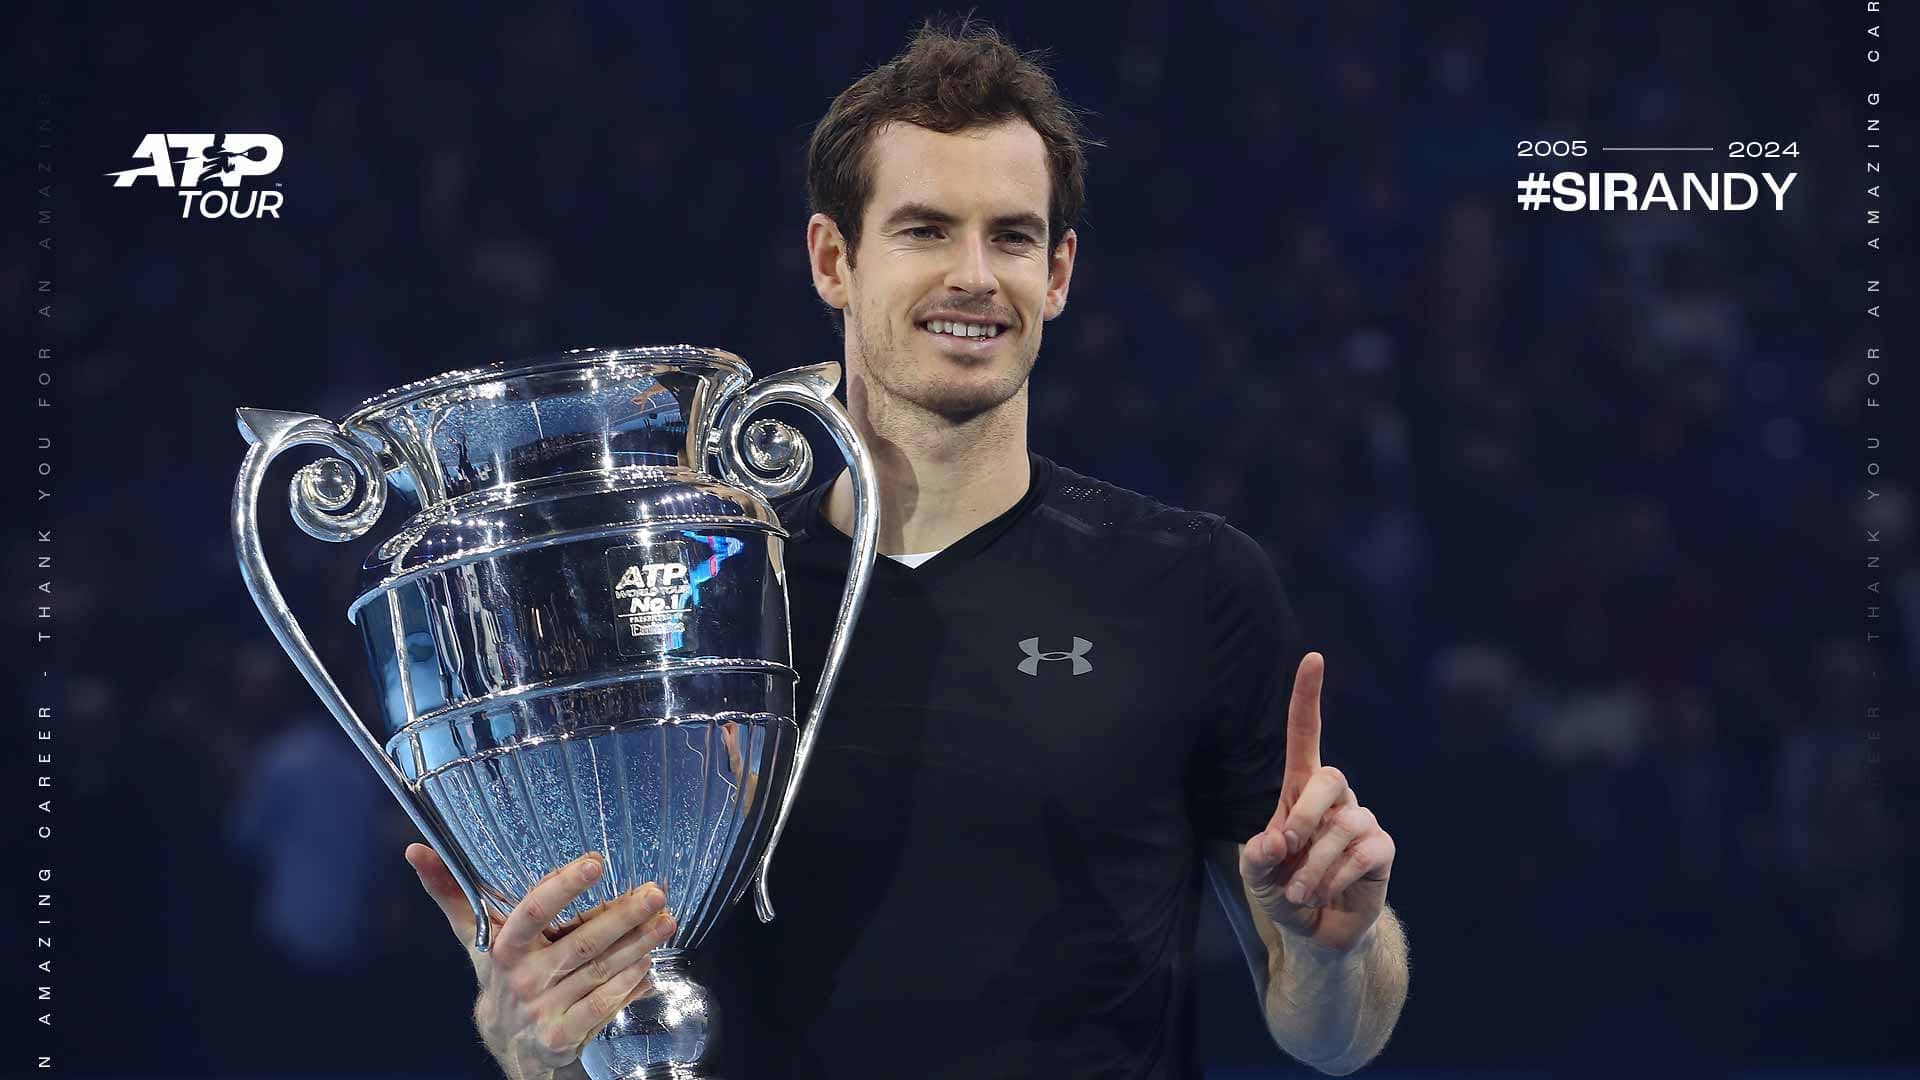 On top of the world: Re-living Murray’s unforgettable 2016 season